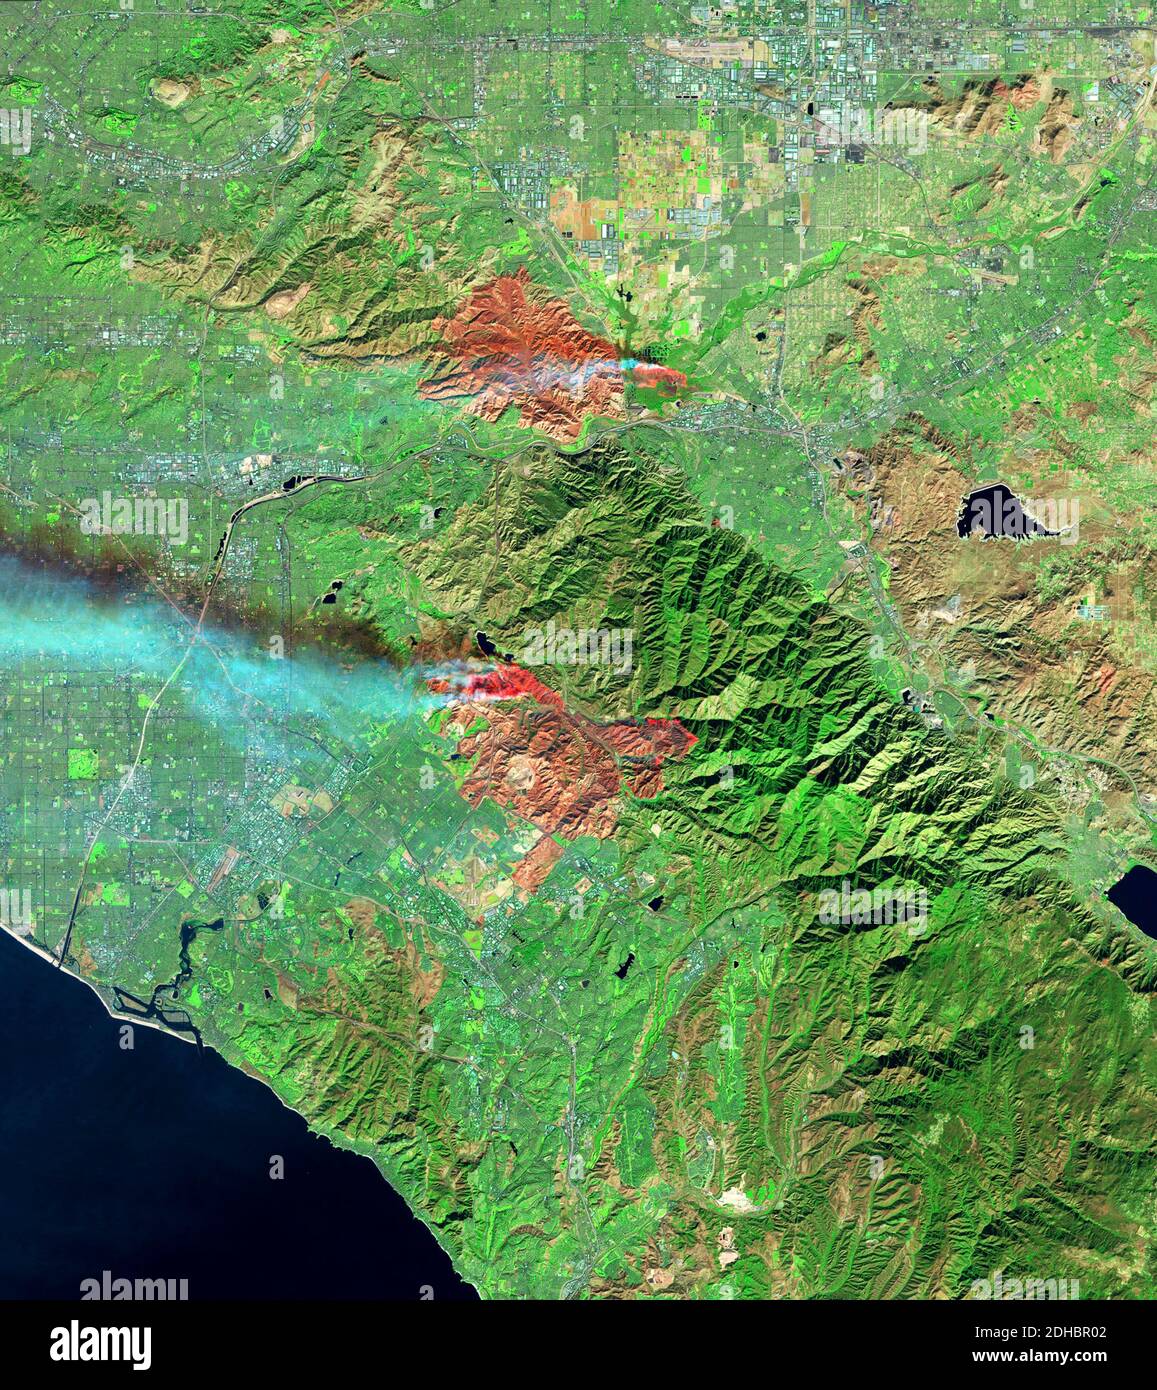 Smoke plumes rise from the Airport and Silverado Canyon wildfires show by the Operational Land Imager on the Landsat 8 satellite December 3, 2020 near Los Angeles, California. Stock Photo